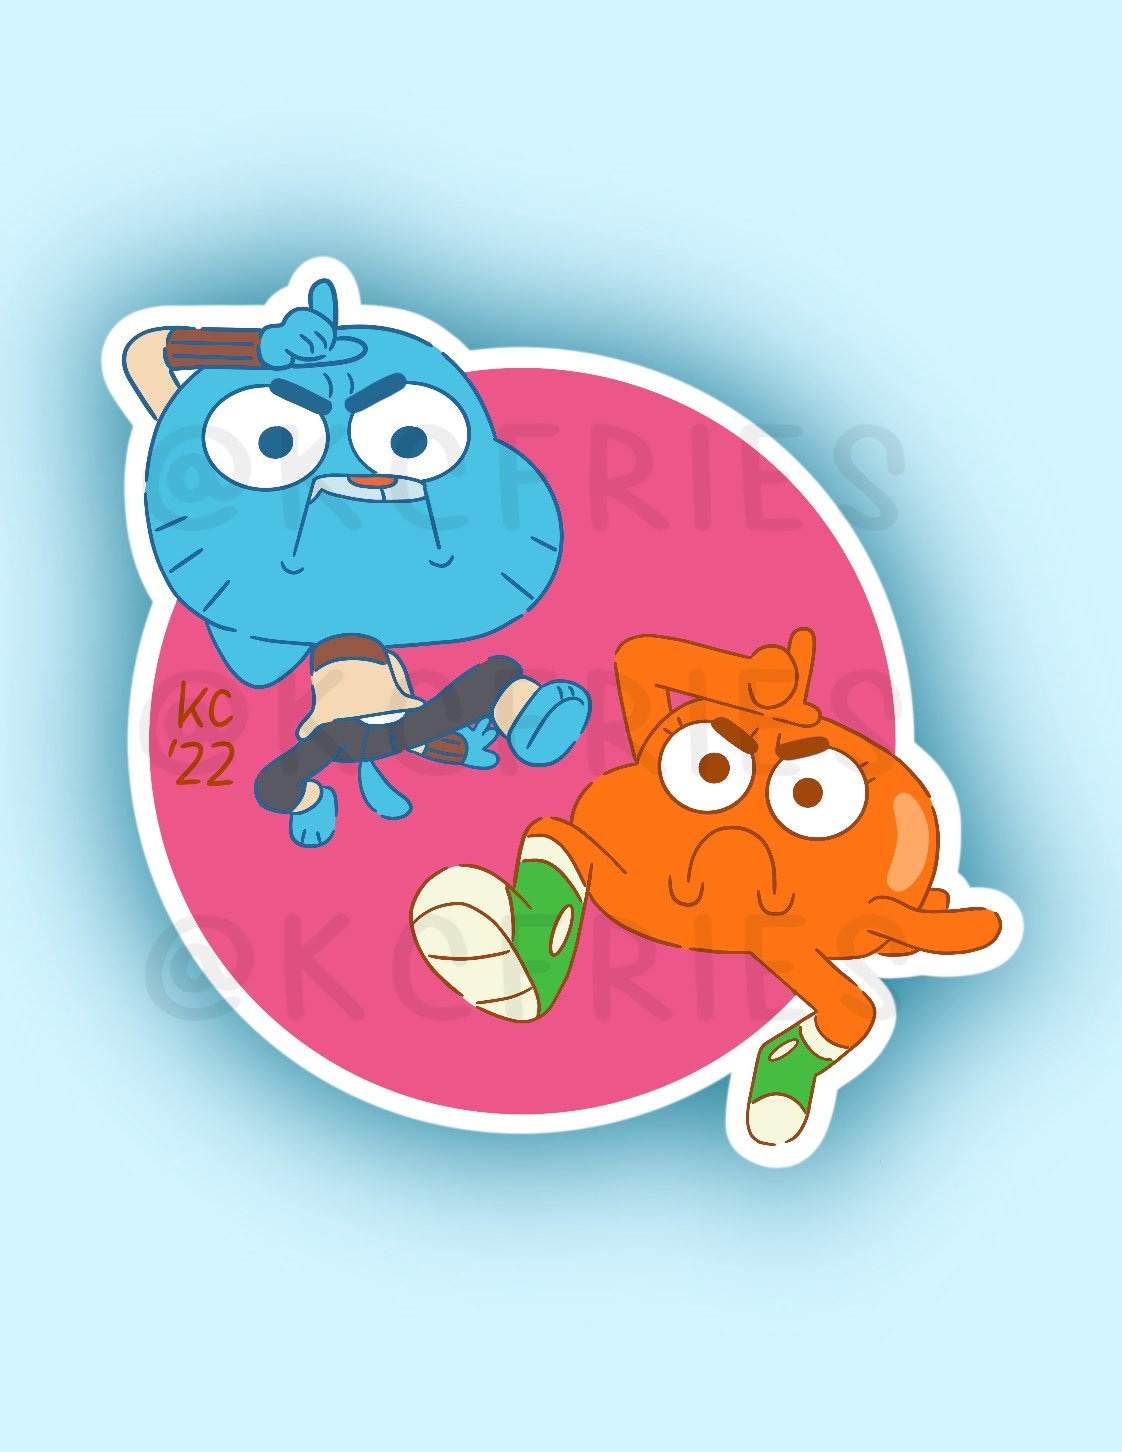 Gumball and Darwin get philosophical, The Question